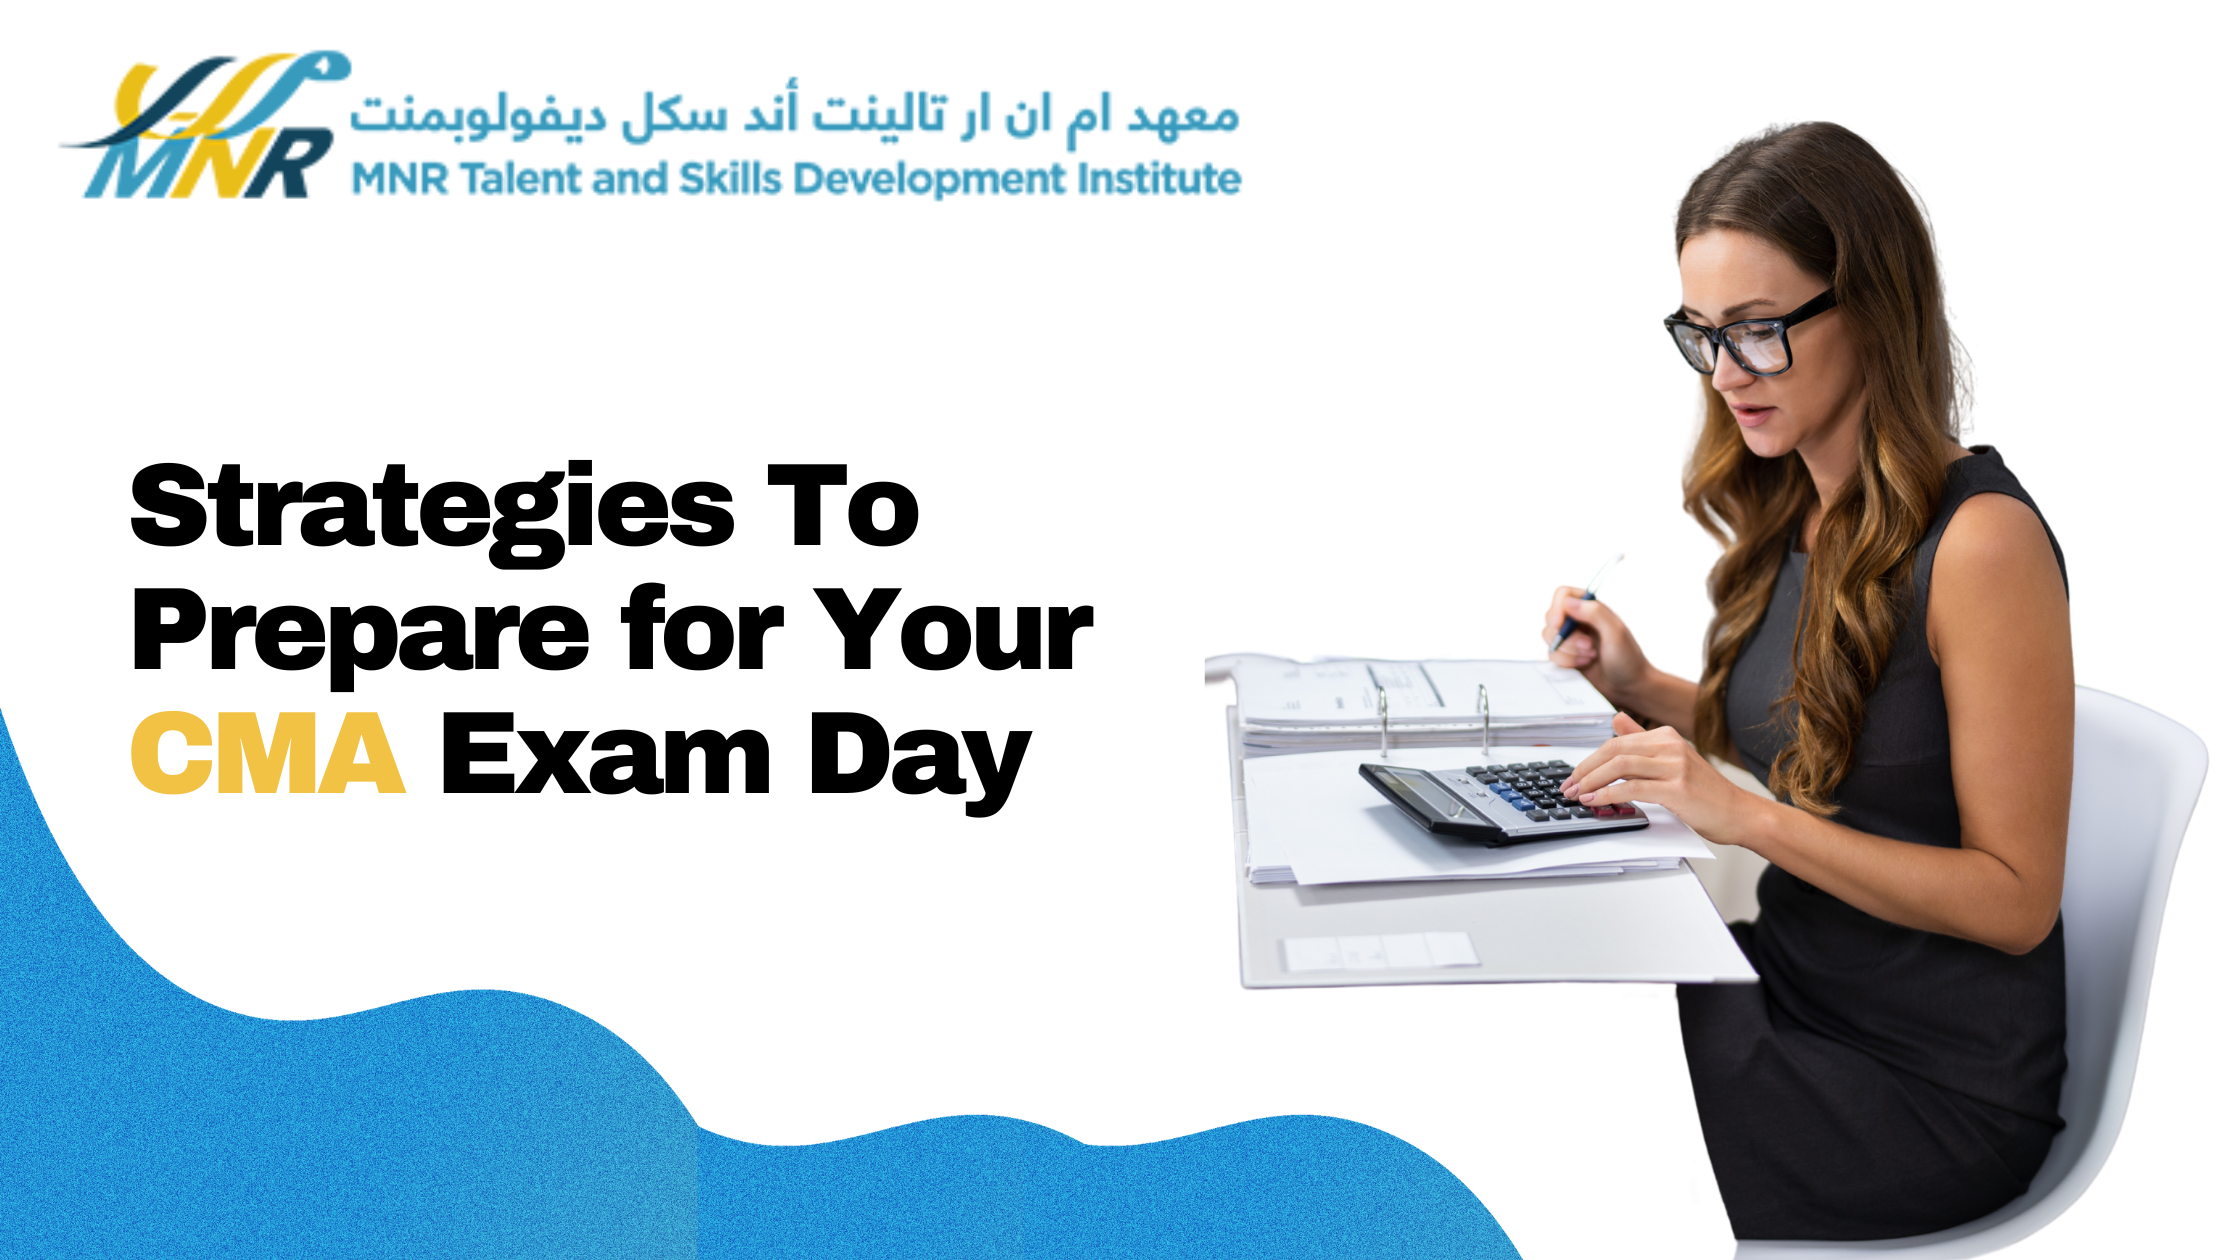 Strategies To Prepare for Your CMA Exam Day